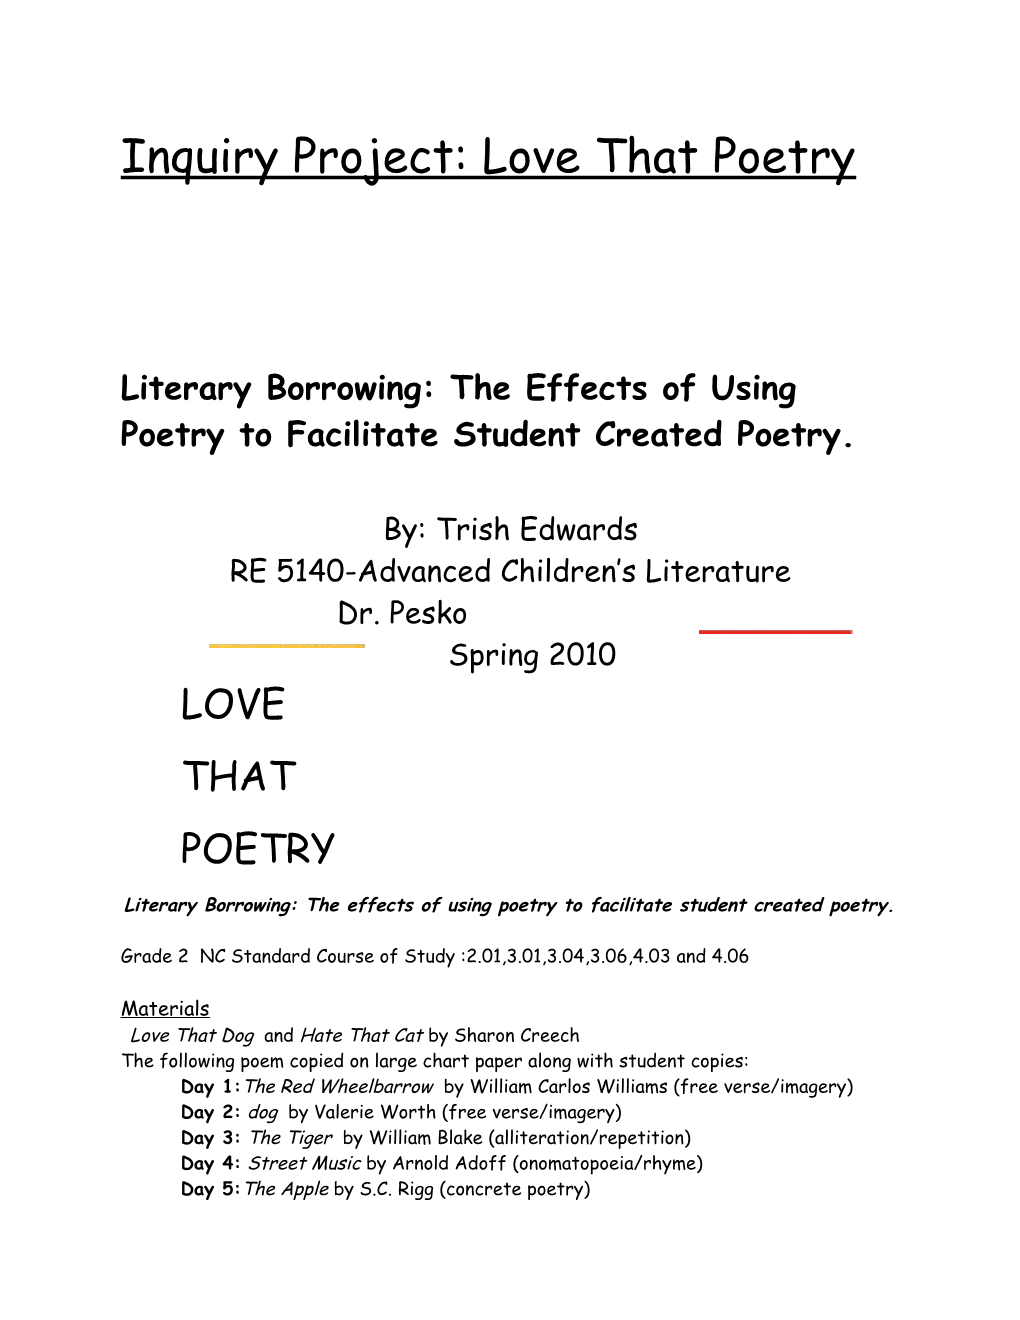 Literary Borrowing: the Effects of Using Poetry to Facilitate Student Created Poetry